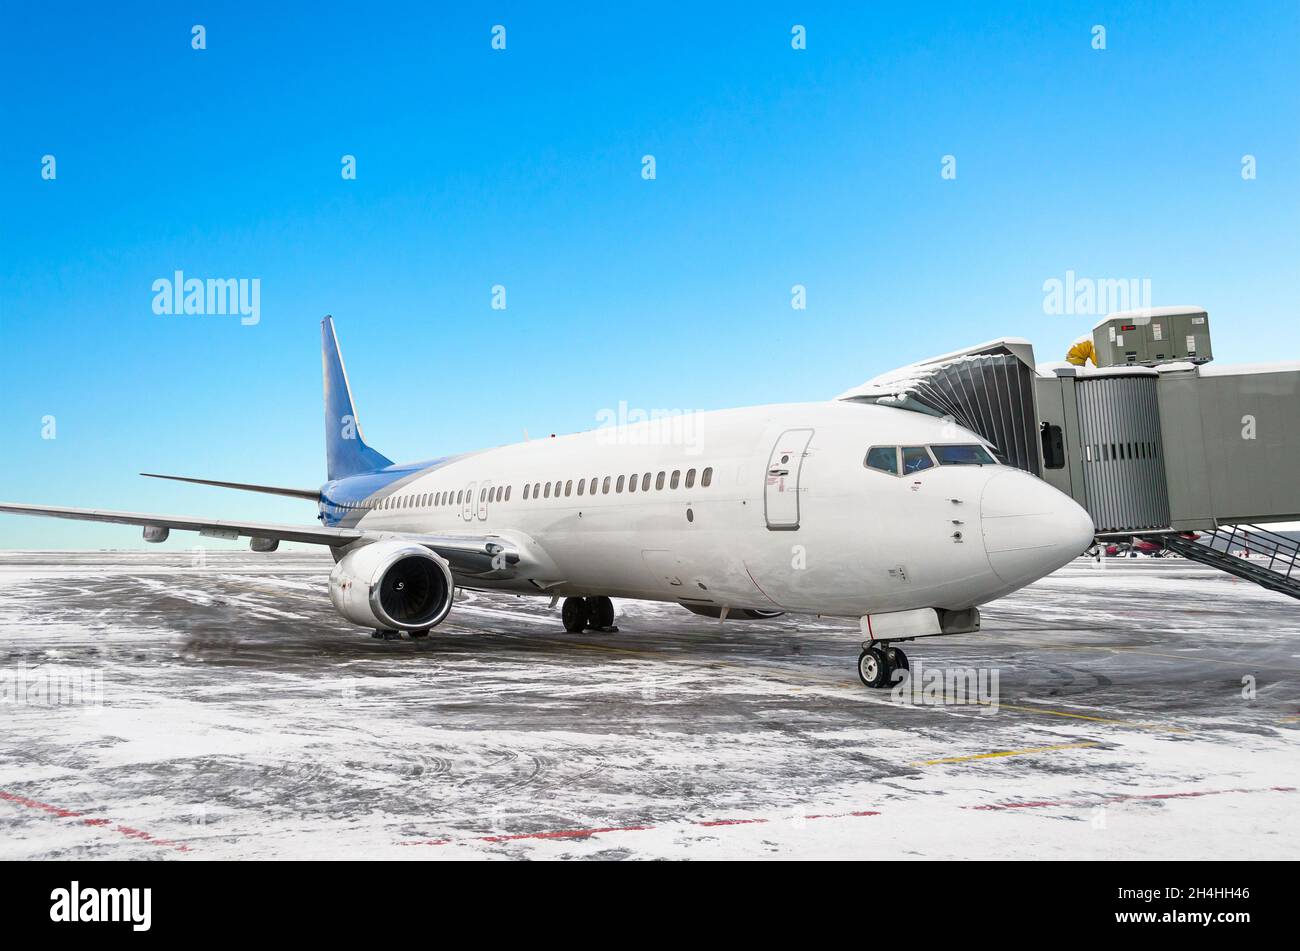 The aircraft apron at the airport to passengers boarding. Stock Photo